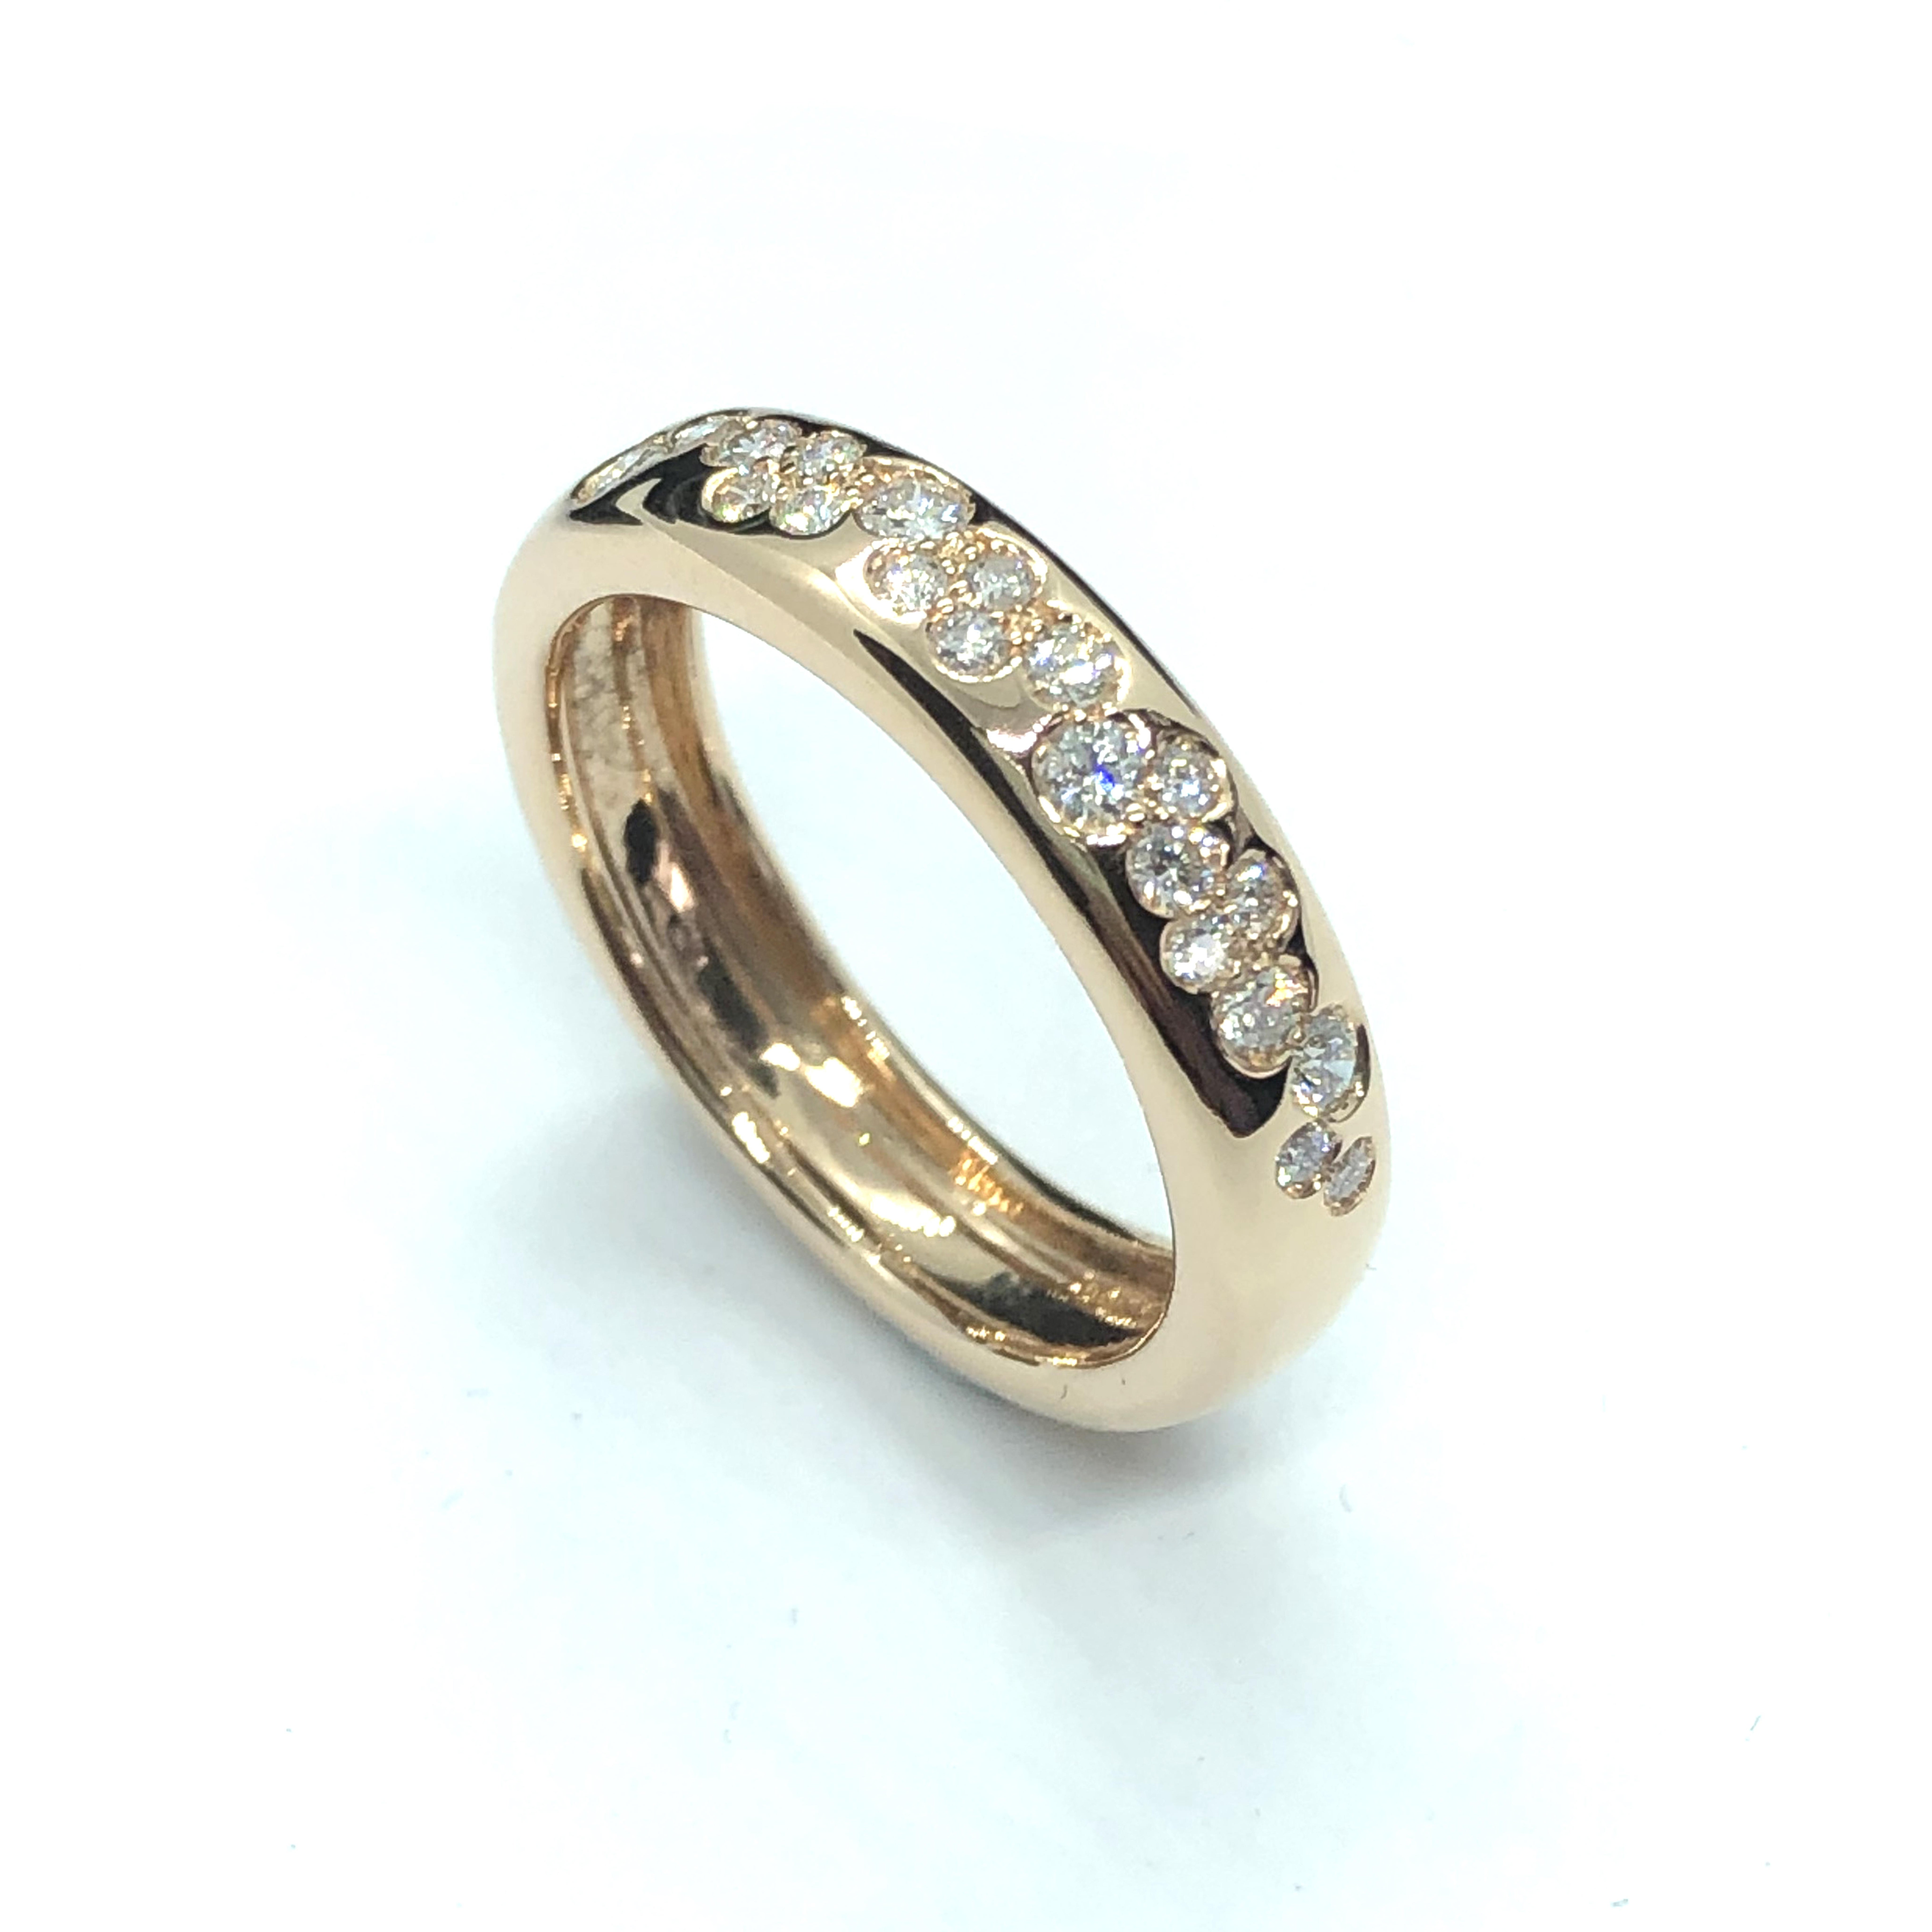 Band ring in 18Kt rose gold gr 5,15 hand crafted in our factory in Italy by ours artisans, this ring beholds 0.30 ct. round cut Vs fine quality diamonds.

Classic, sophisticated, fashion look, everlasting in time style, you can wear one, two or